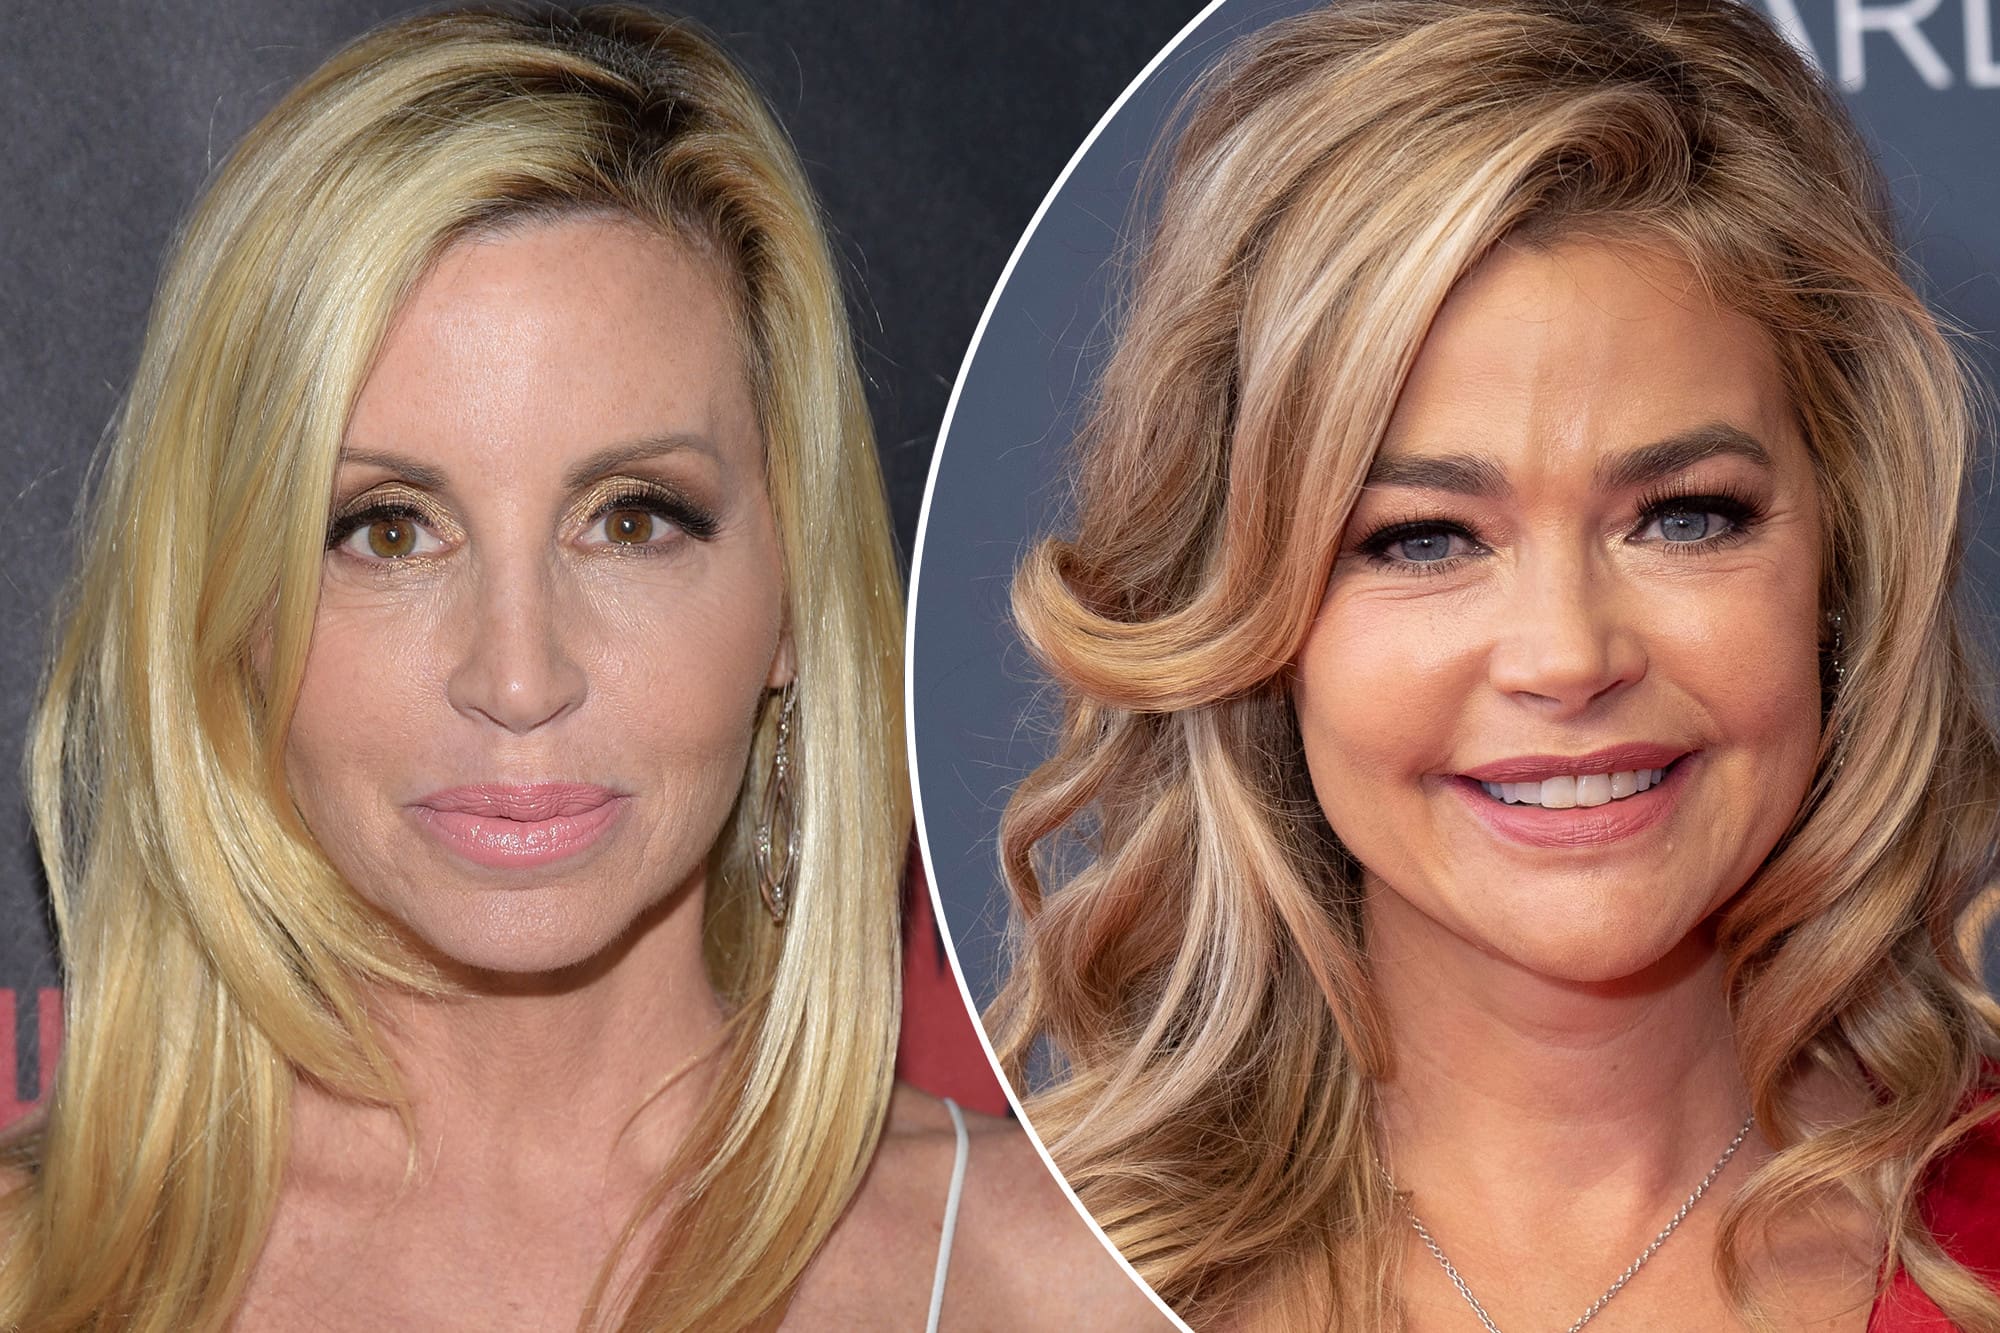 camille-grammer-drags-hypocrite-denise-richards-after-comment-about-her-looking-high